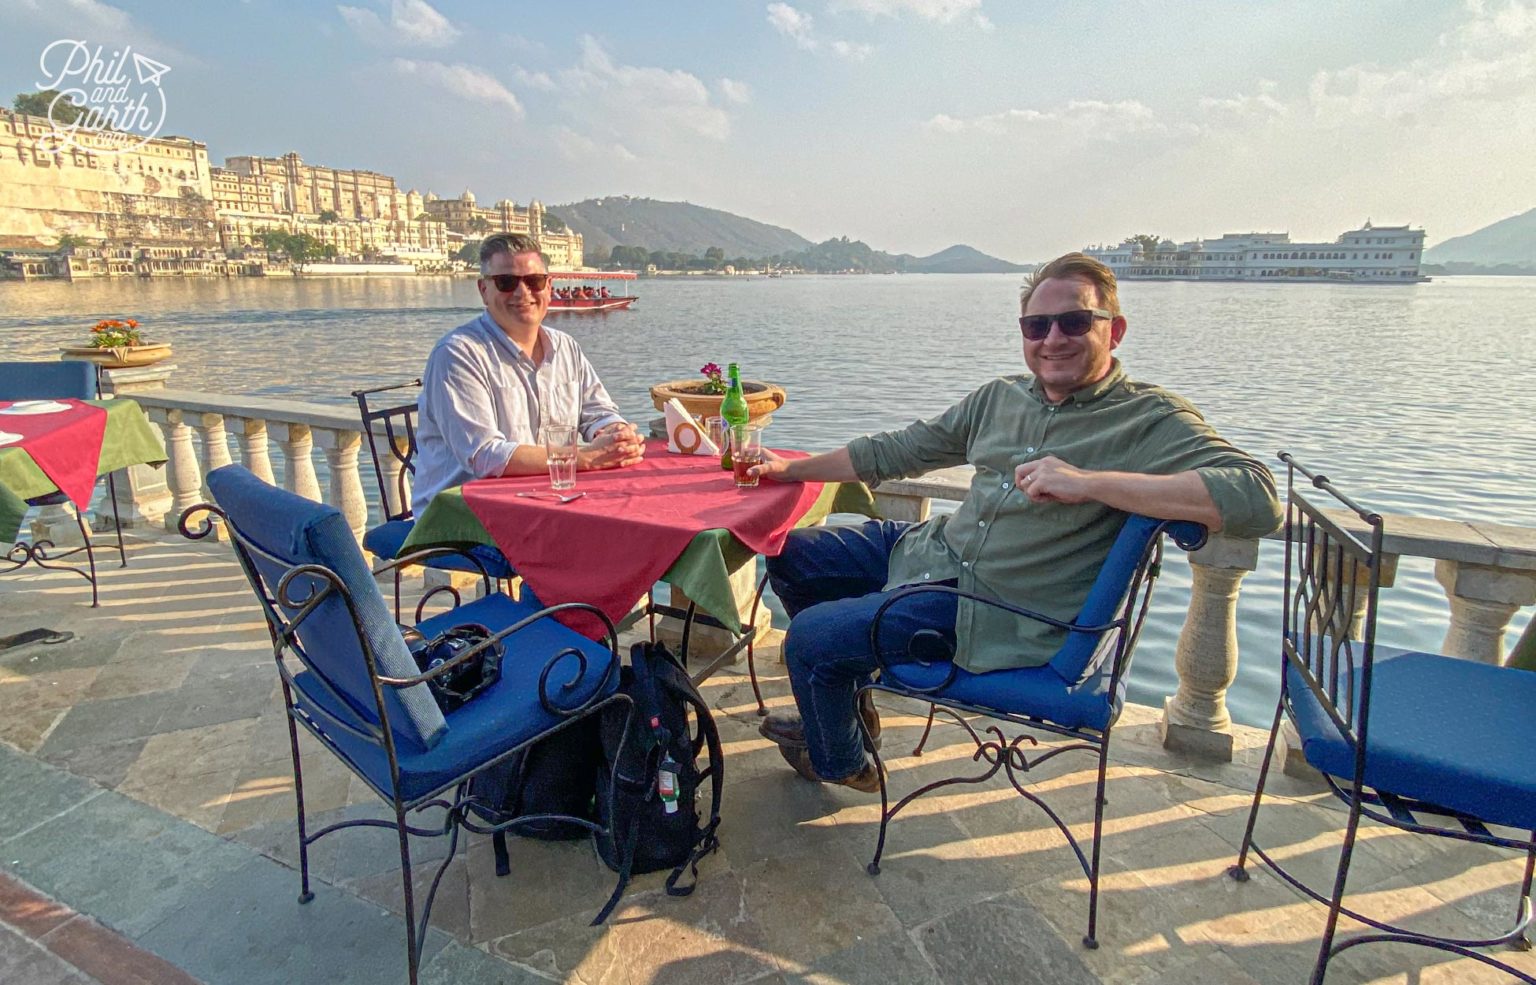 Udaipur Itinerary - 2 Days In India's Royal City of Lakes | Phil and Garth